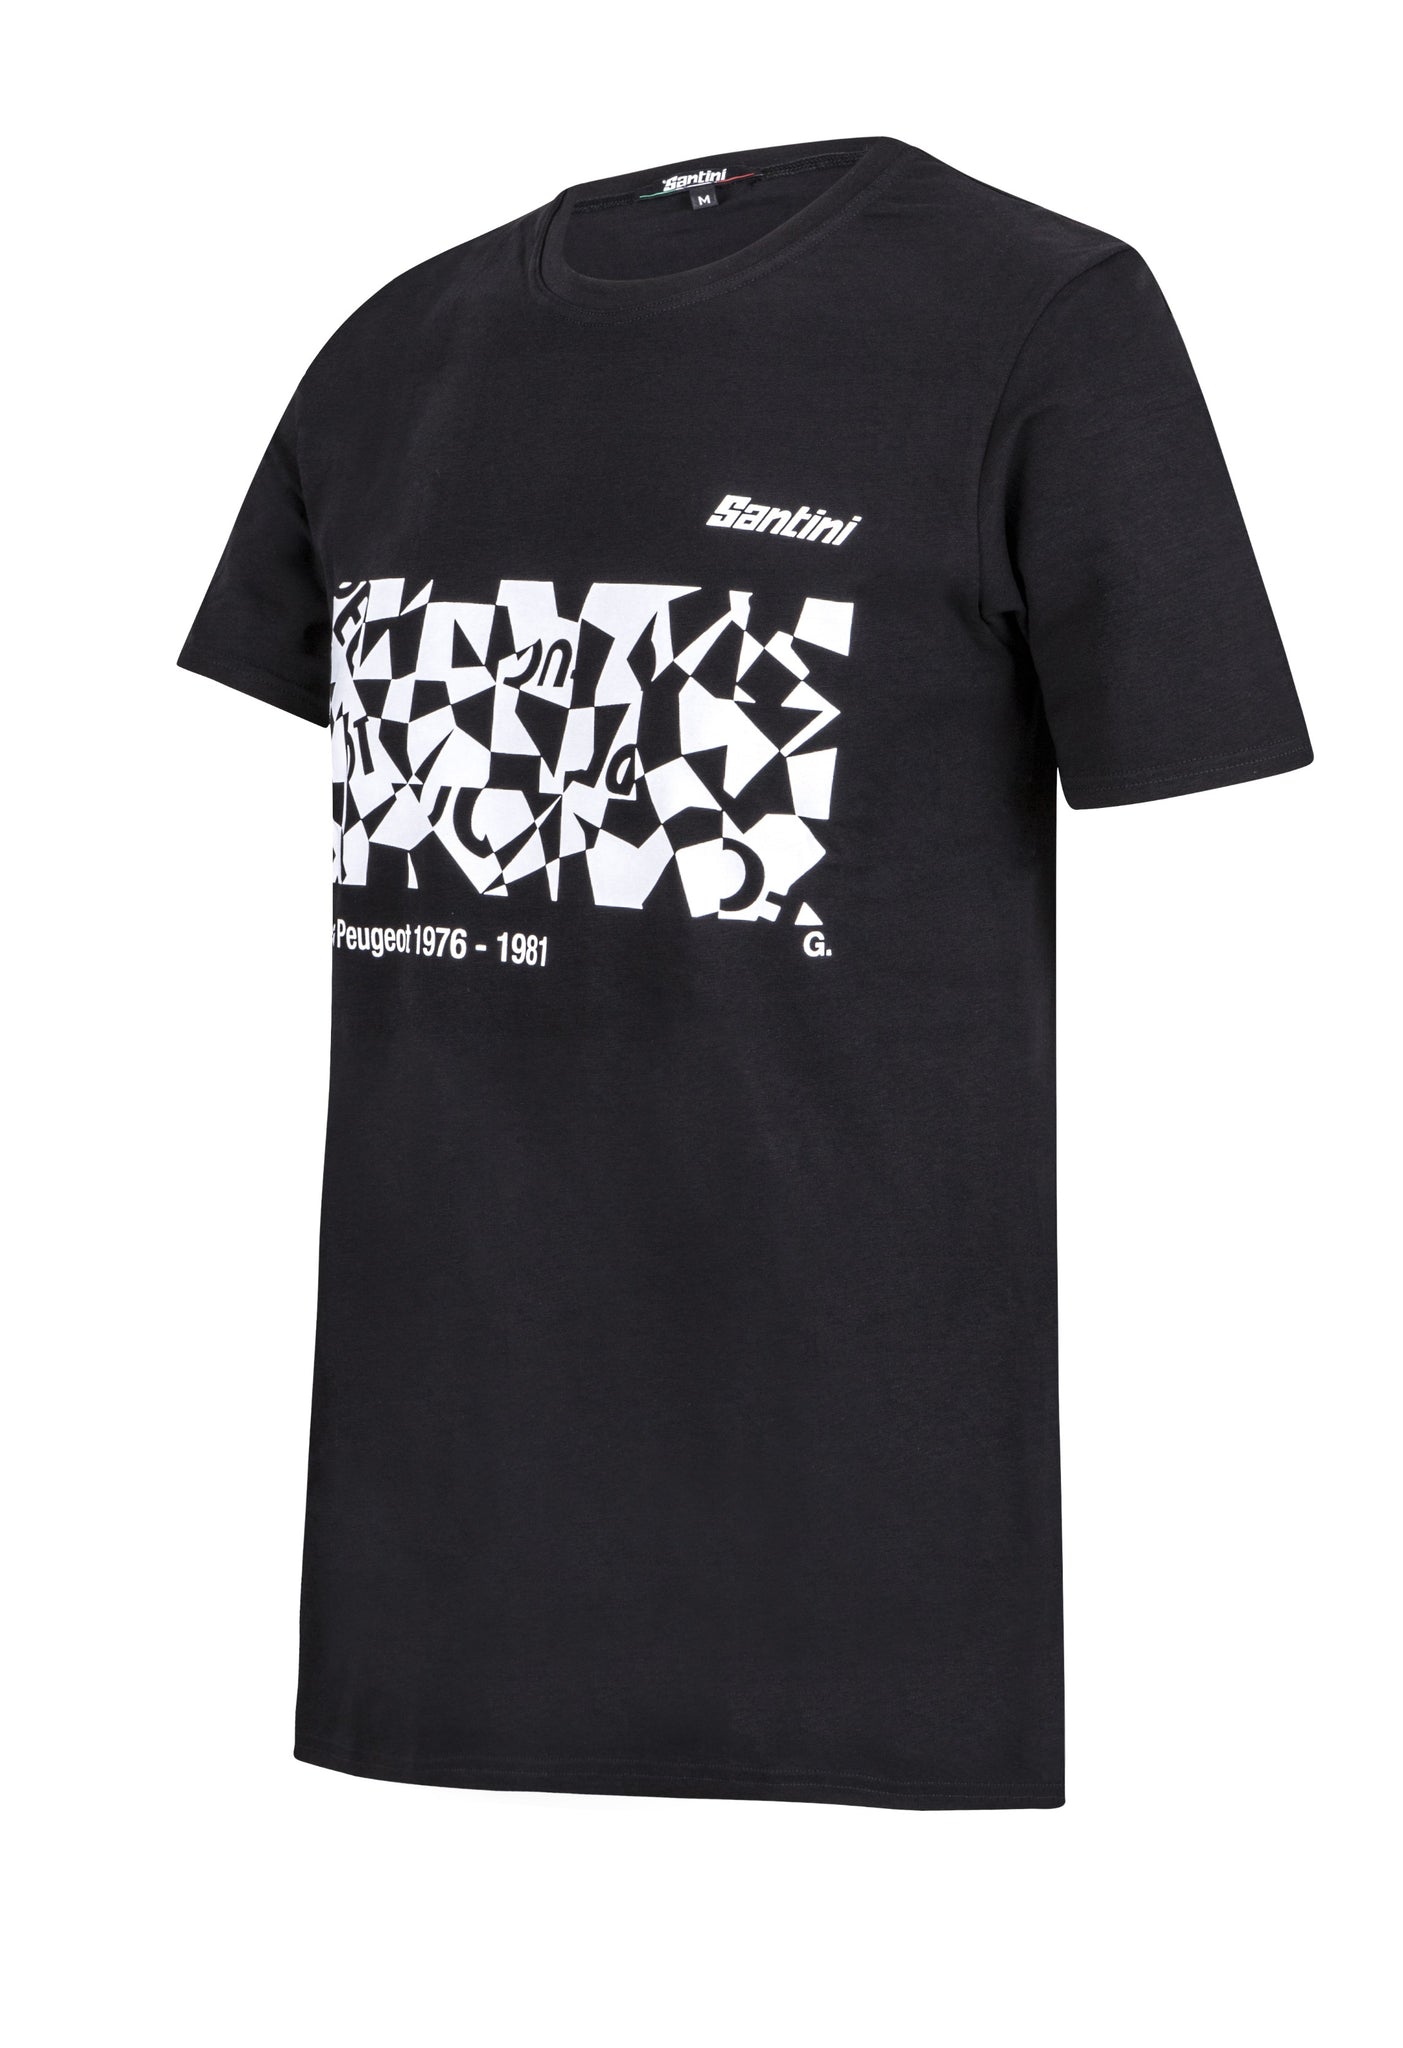 Team Peugeot Art Series Mens T-Shirt Made in Italy by Santini – Cento ...